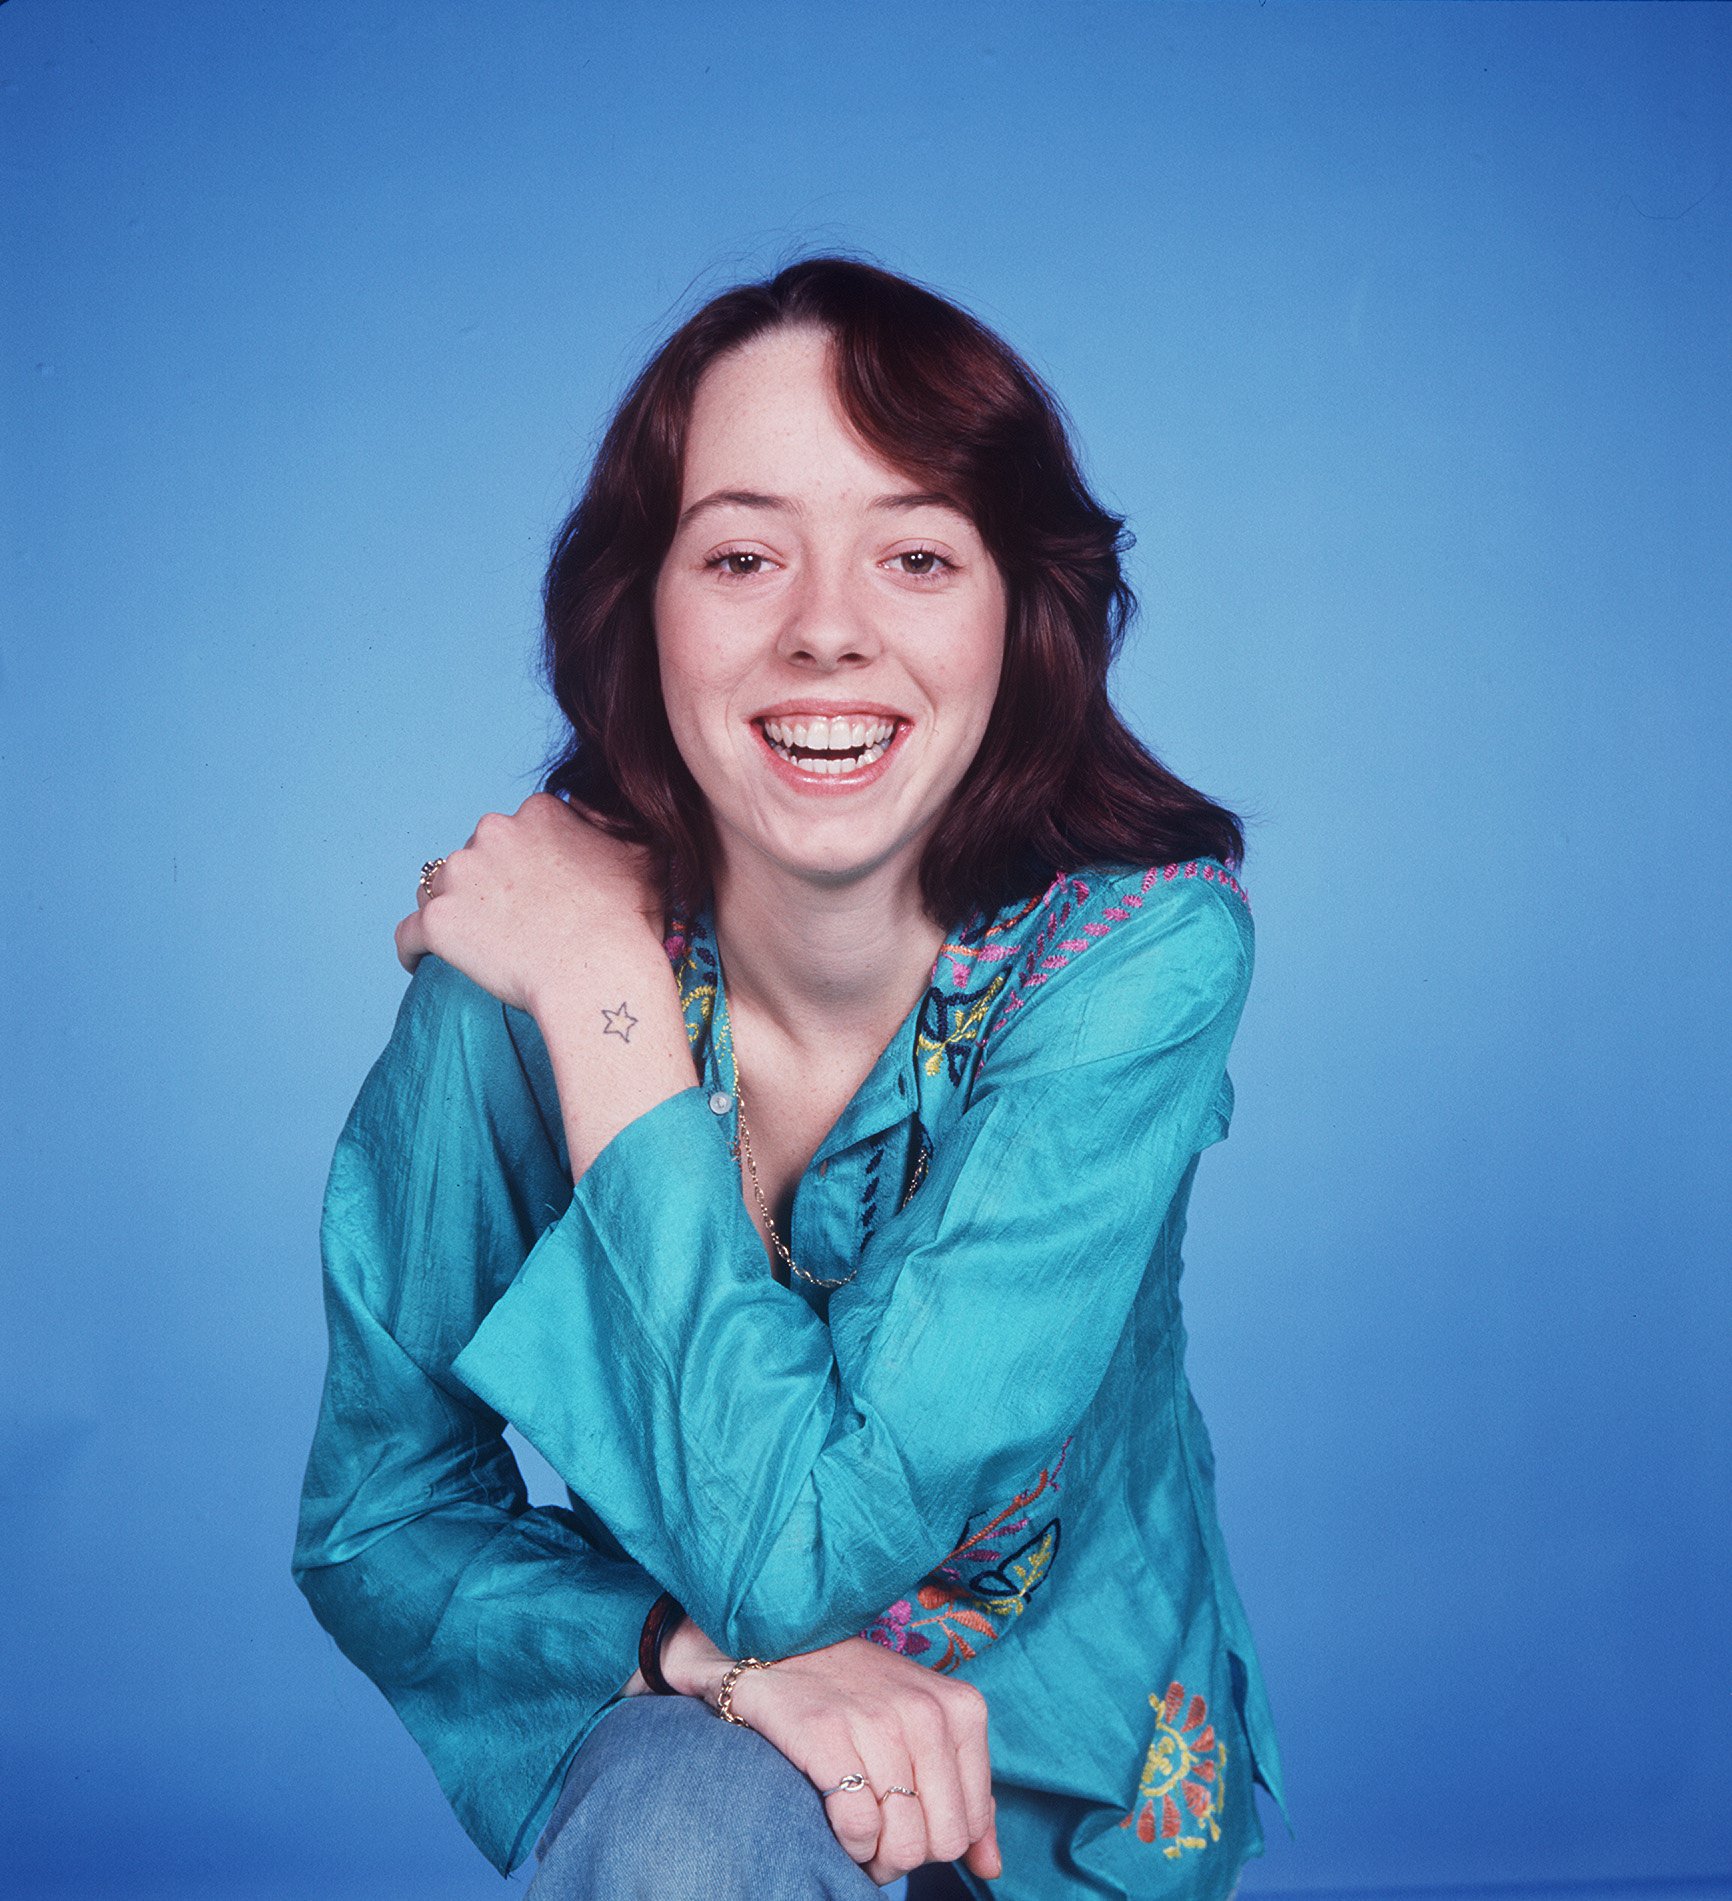 "One day at a time" actor Mackenzie Phillips as Julie Cooper on January 1, Los Angeles, California |  Photo: Getty Images